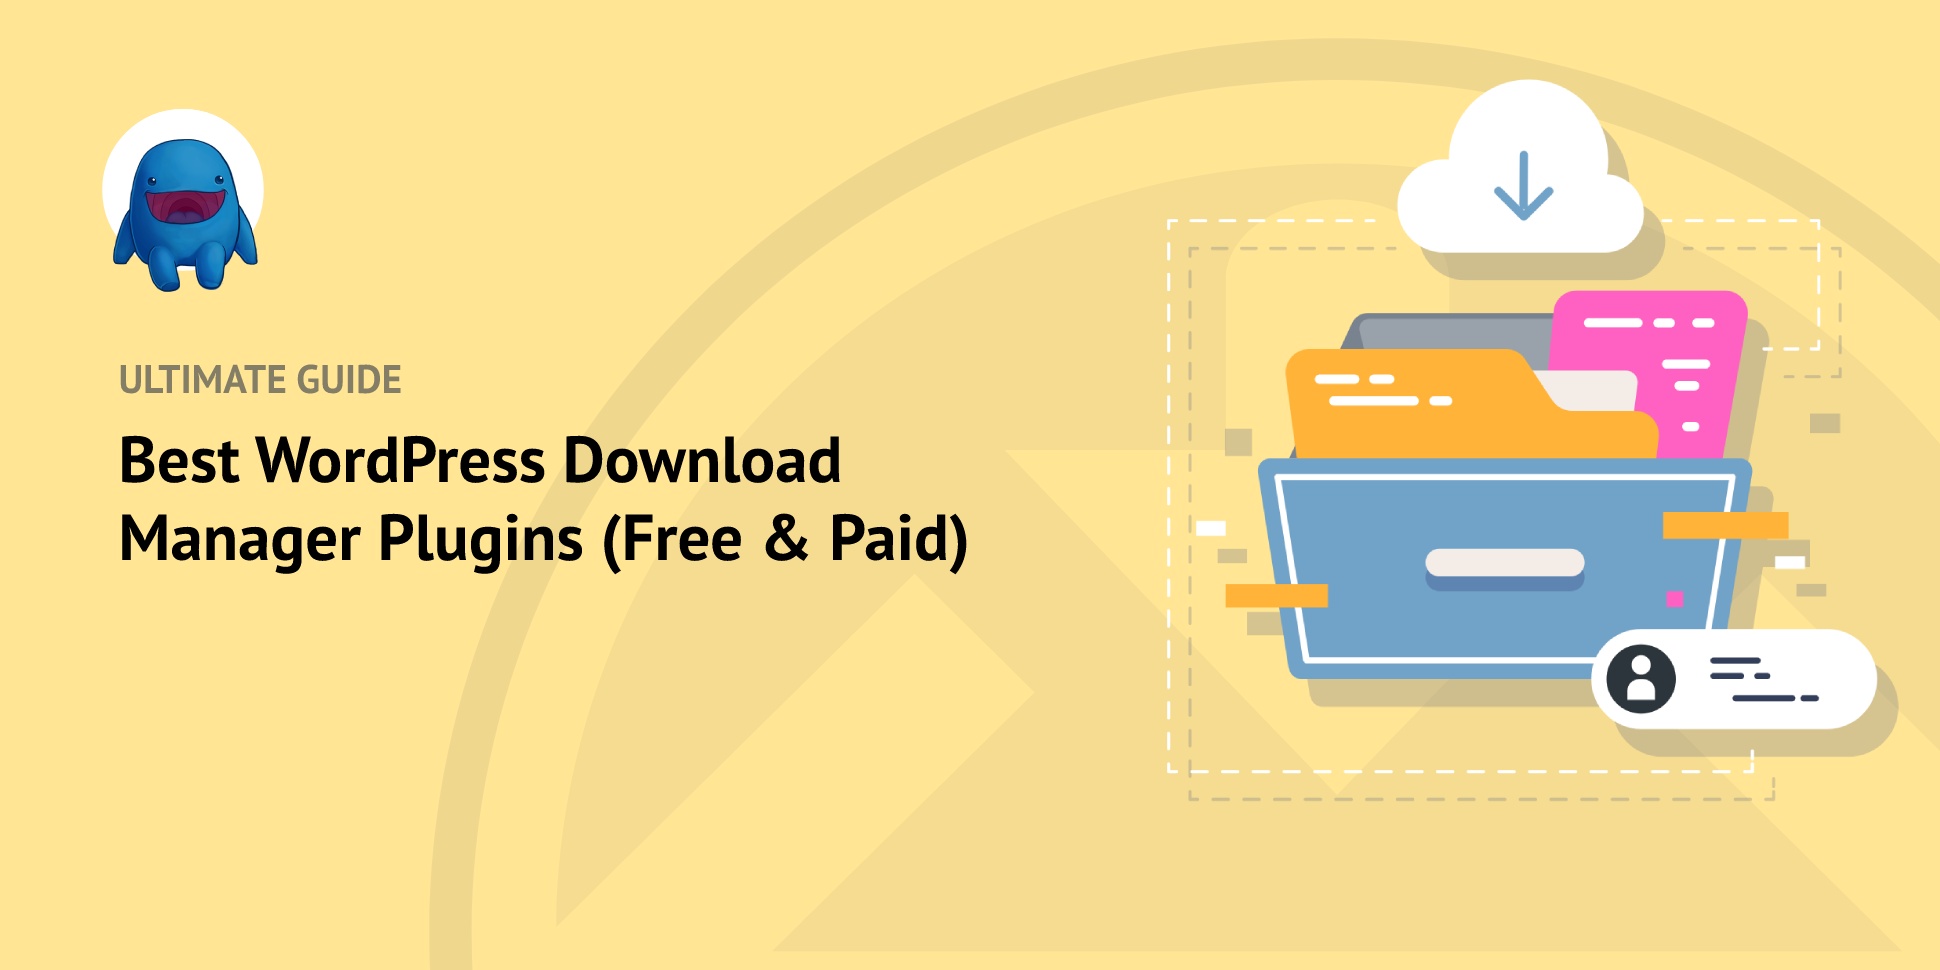 The Best WordPress Download Manager Plugins (Free & Paid)